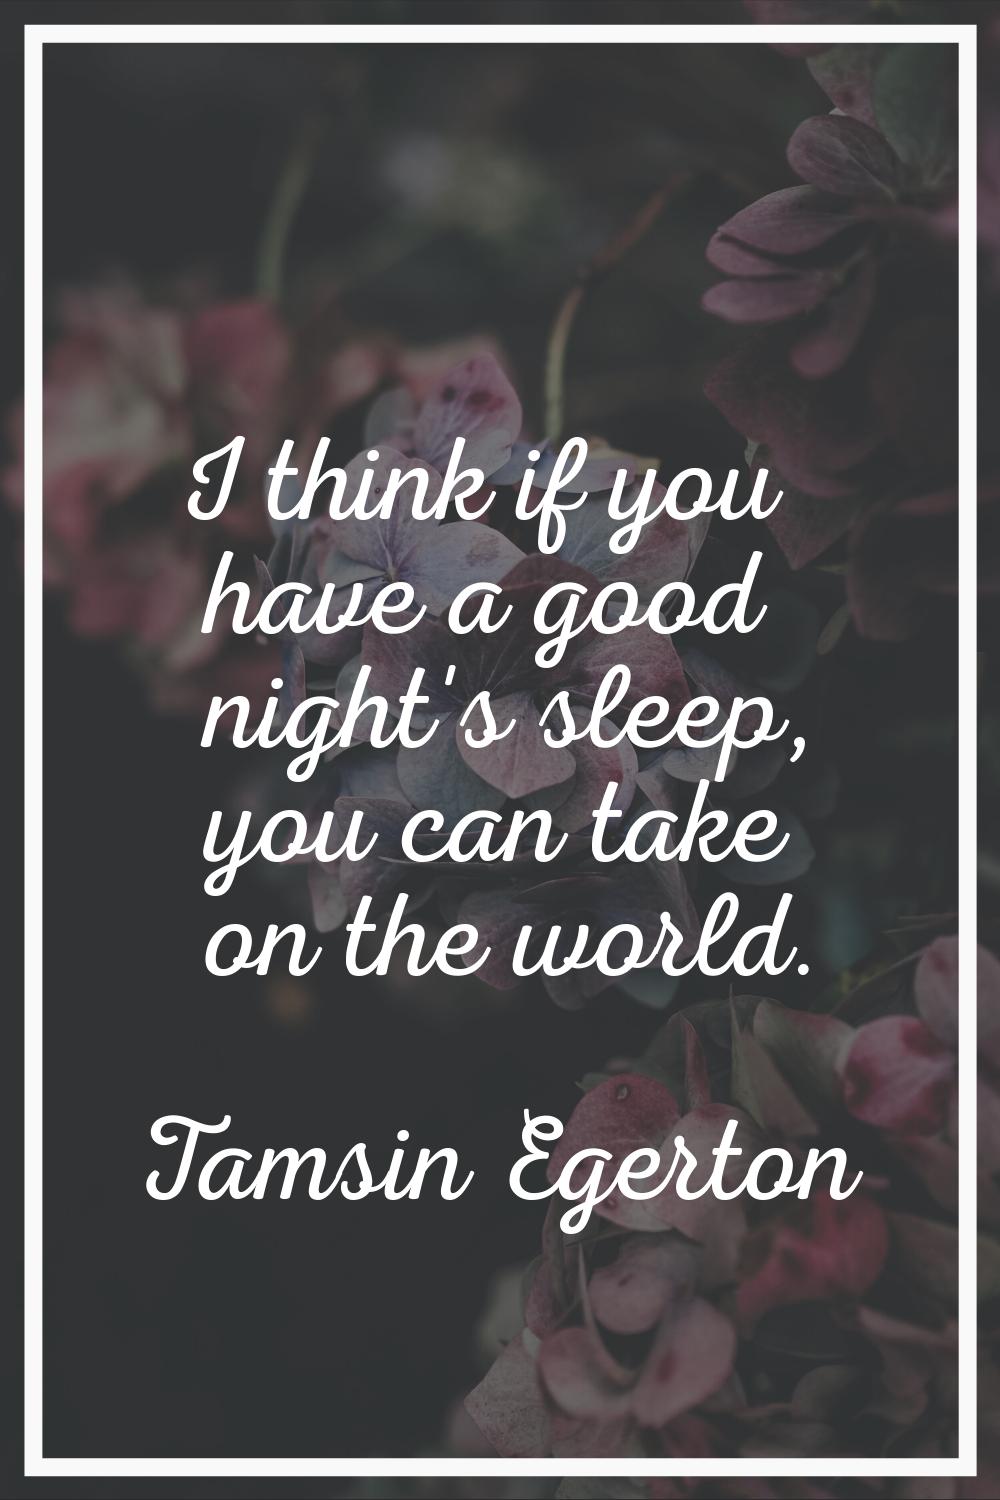 I think if you have a good night's sleep, you can take on the world.